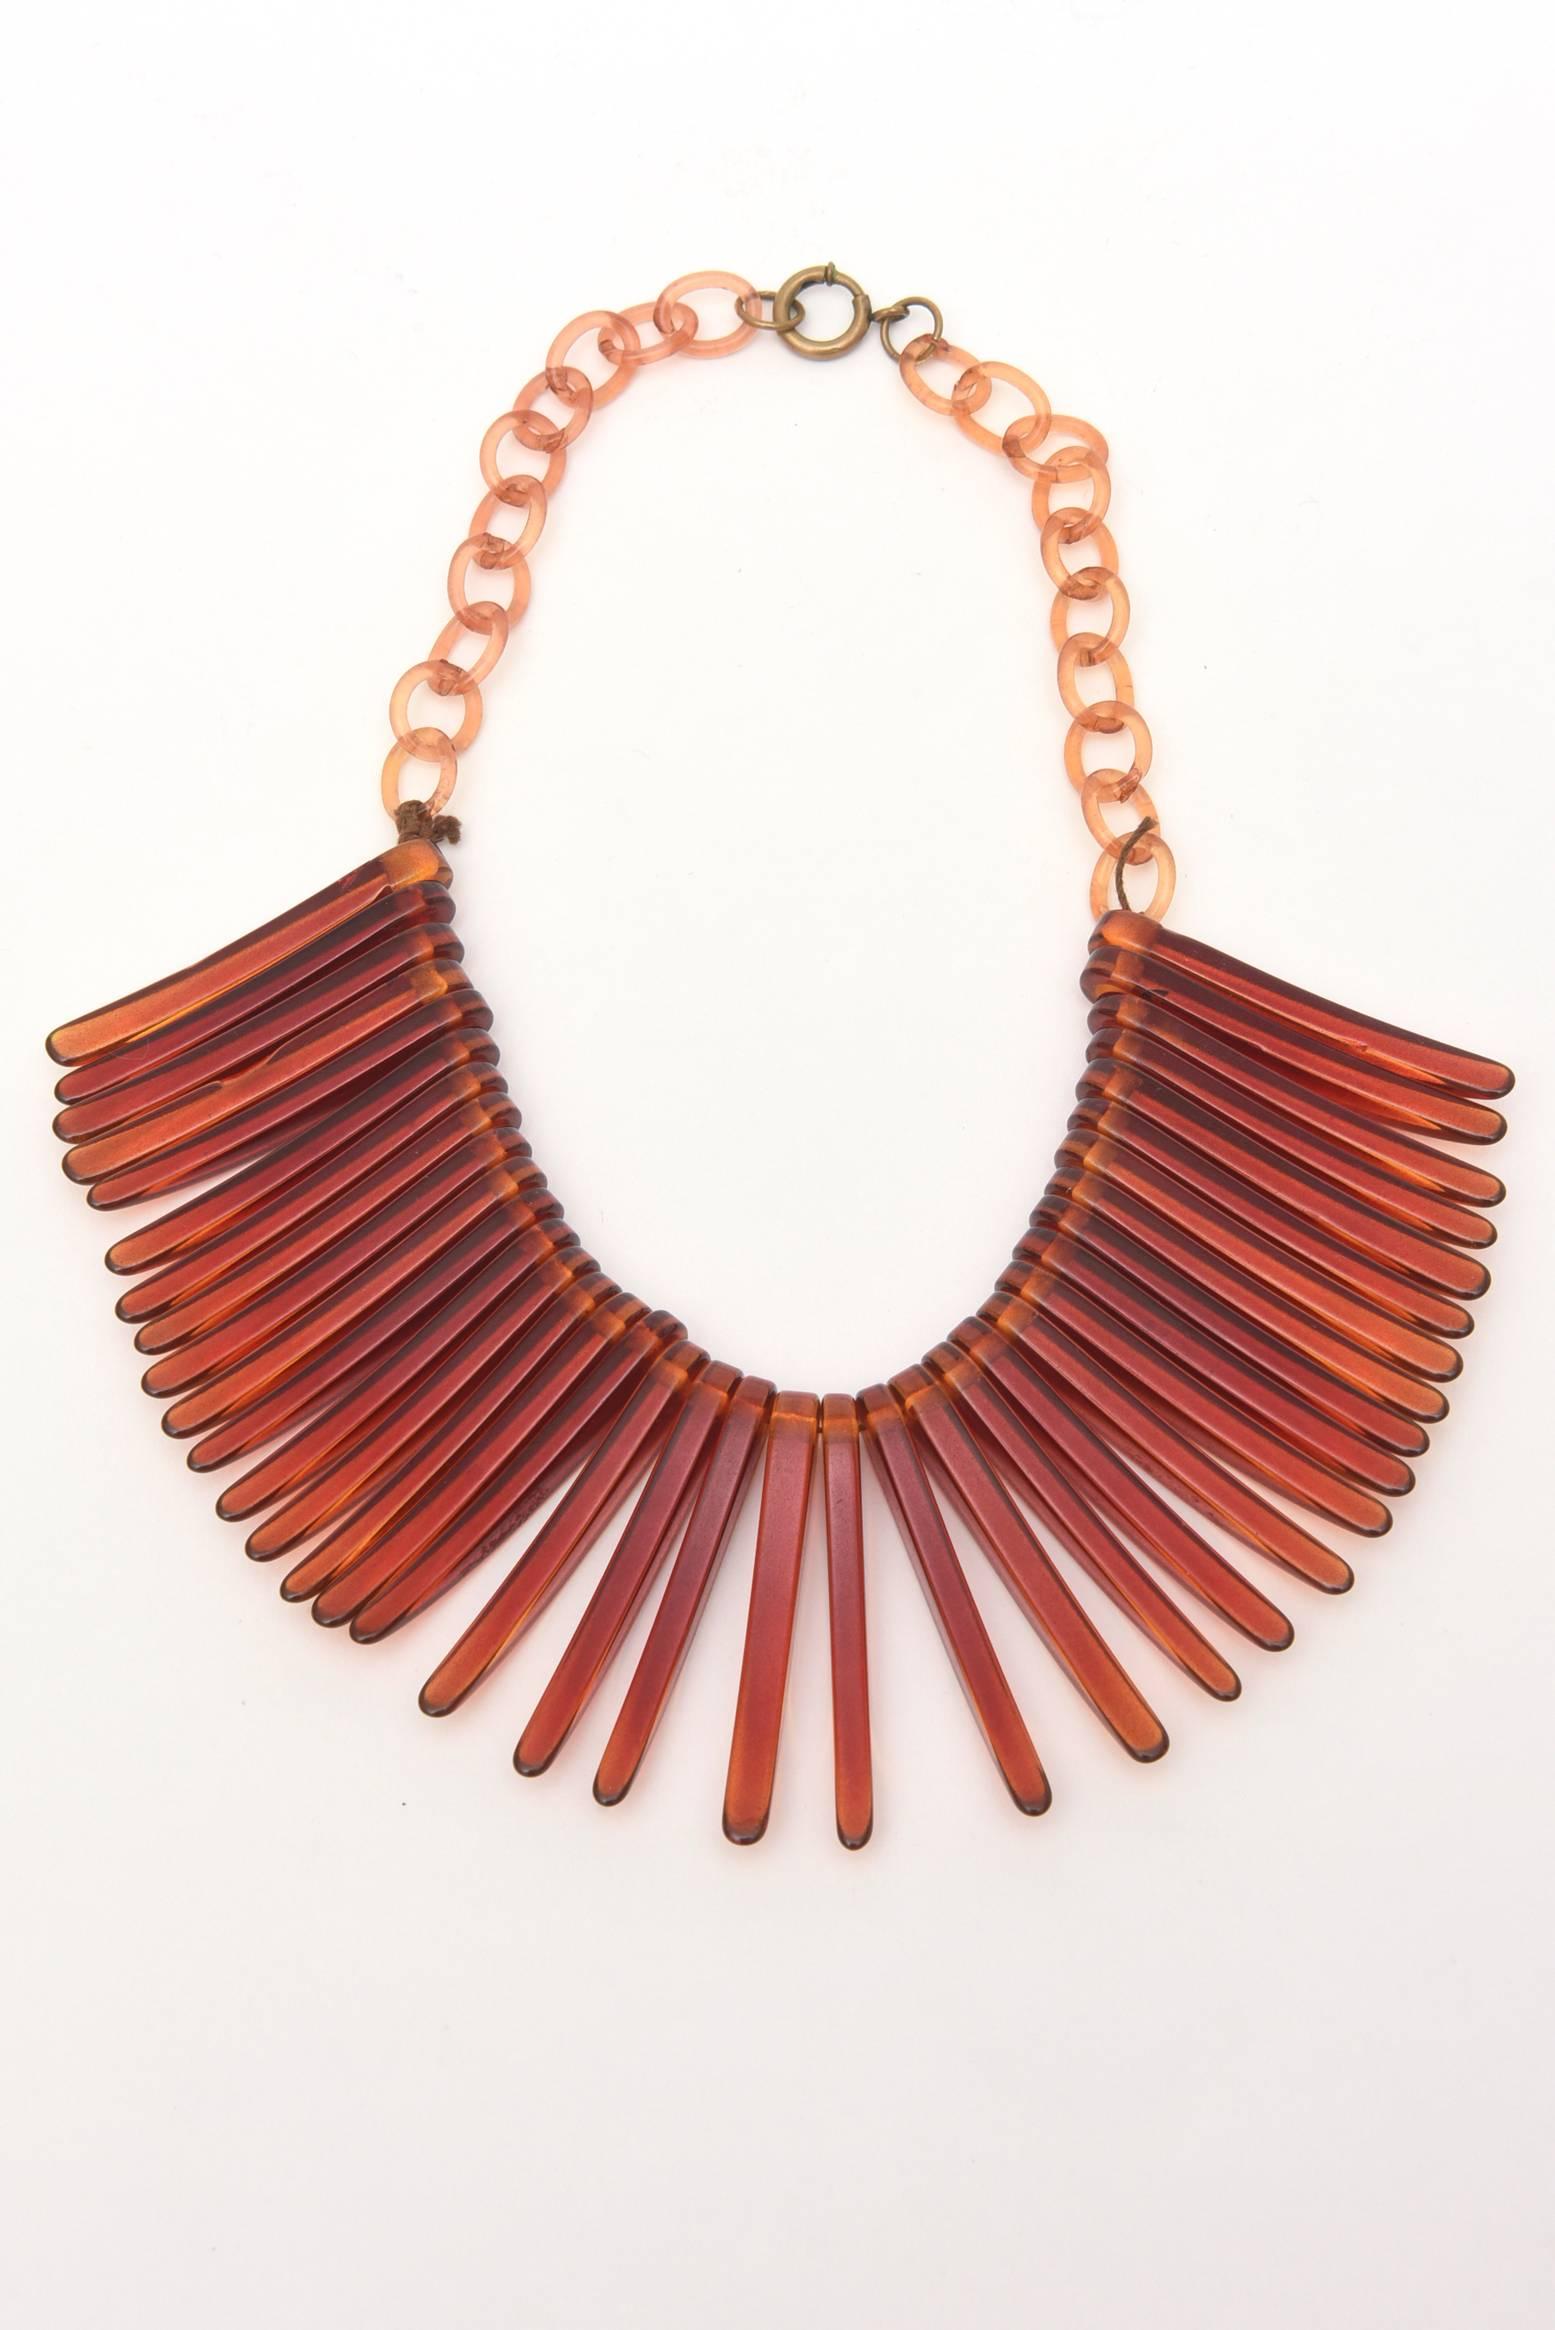 This very in vogue collar choker vintage resin necklace looks like fringe. It is tortoise like in color with resin links in a lighter amber color. It lays beautifully on the neck. A great piece for any wardrobe. Fringe is in, hot and back! It is